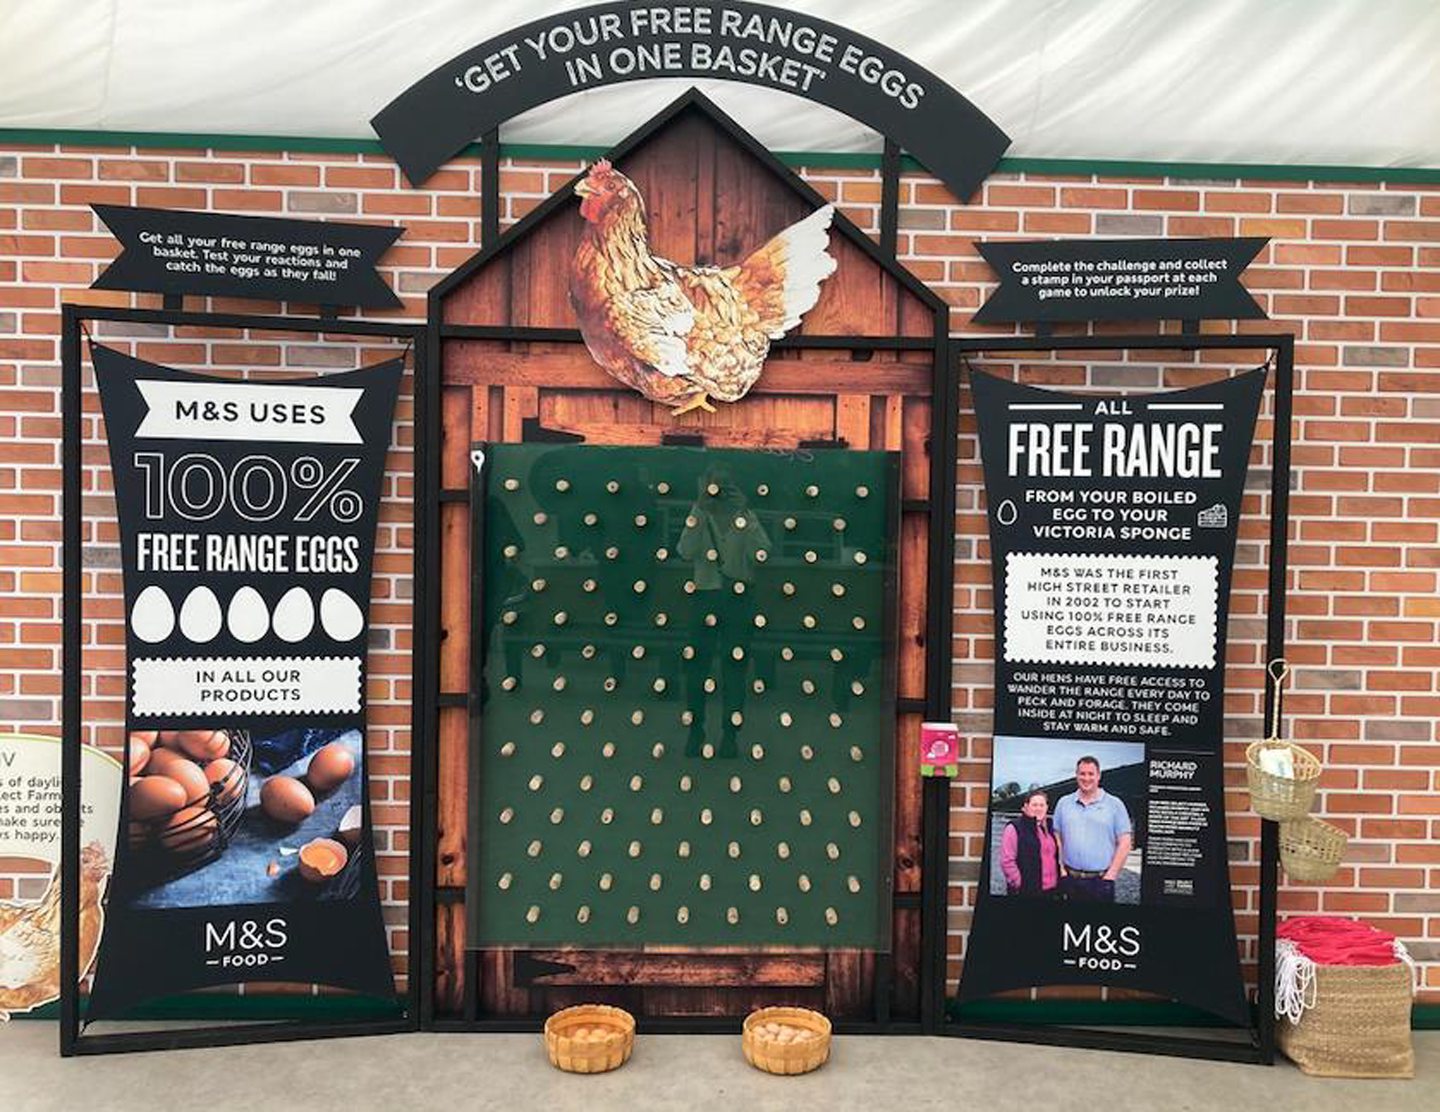 M&S's Get Your Free Range Eggs in One Basket game.